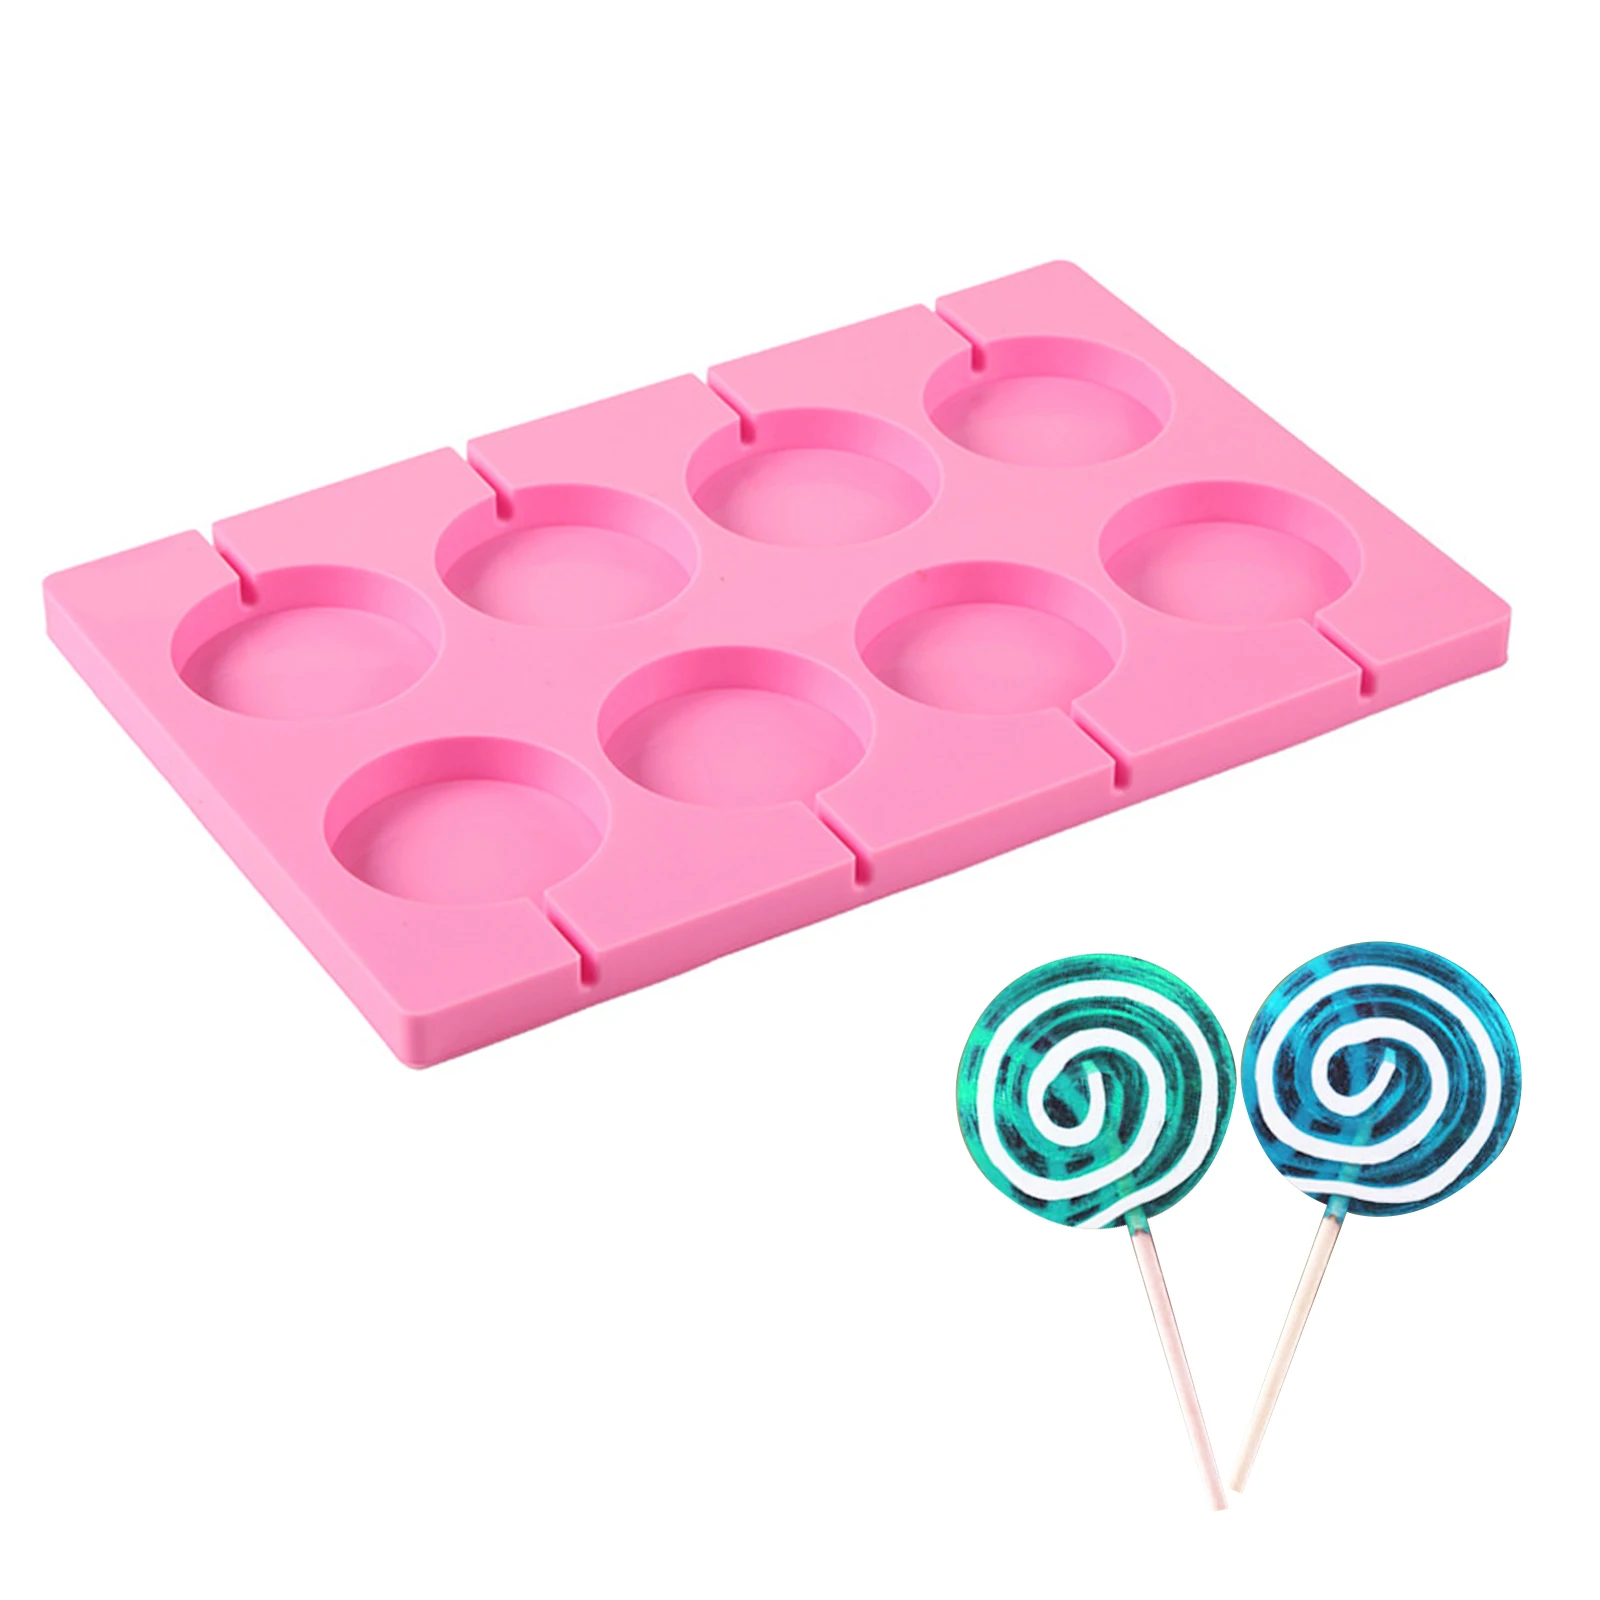 

8 Holes Silicone Mold Big Round Lollipop mold Cake Decorating Tools 3D Snack Tool For Same as Snack Party Kitchen Tools Bakeware